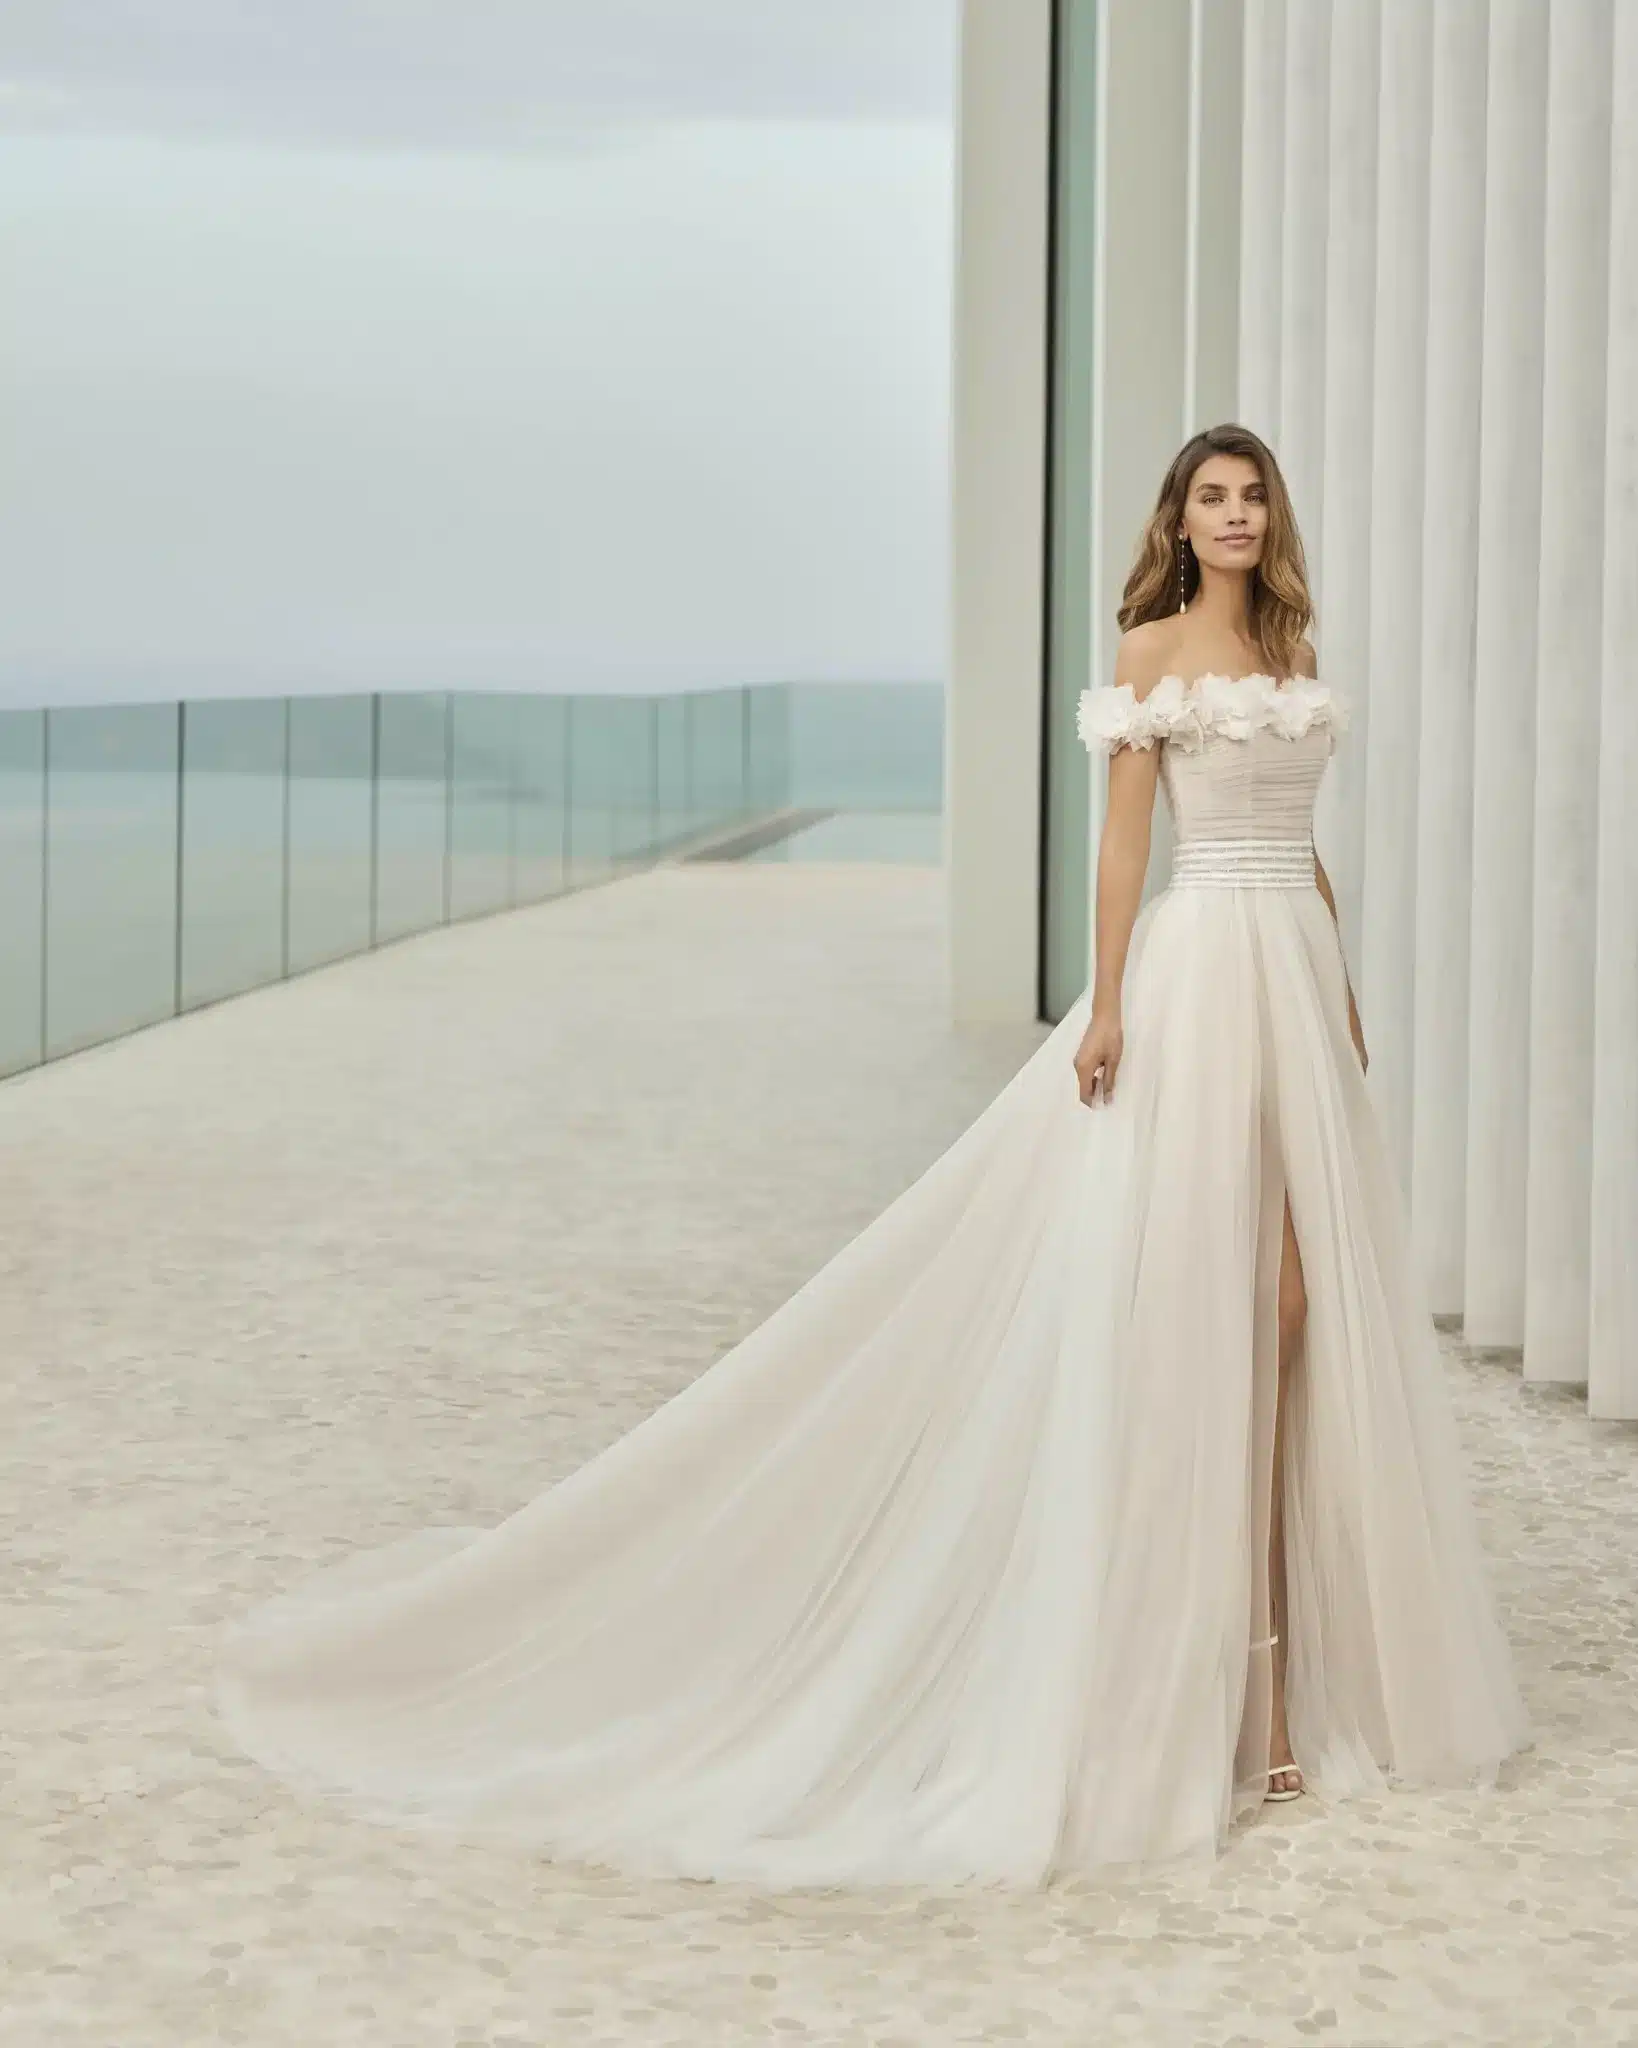 2021 Bridal gowns: Rosa Clará launches its new bridal attire